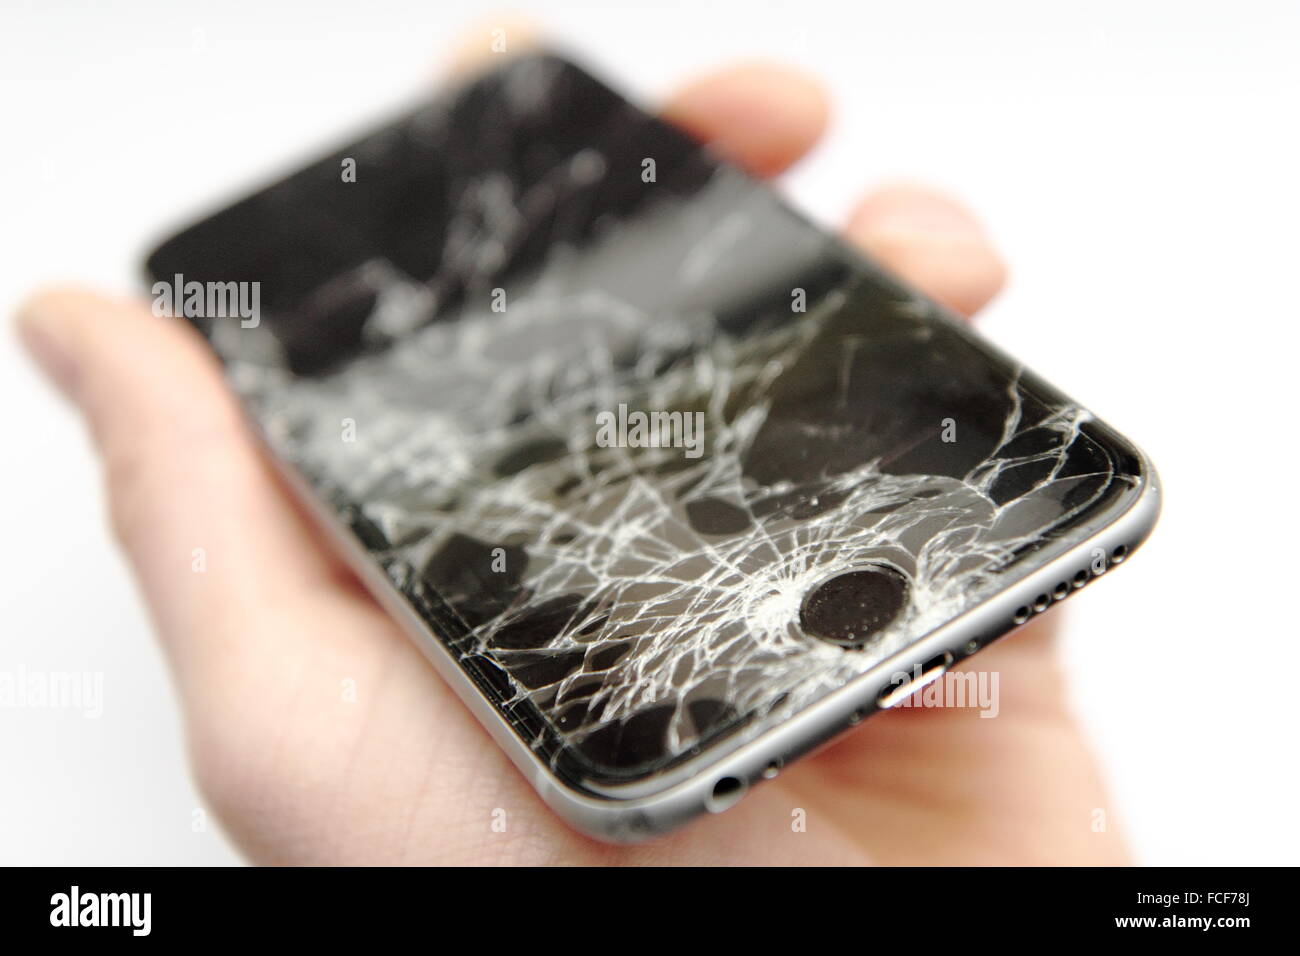 iPhone6 with broken glass hold in hand Stock Photo